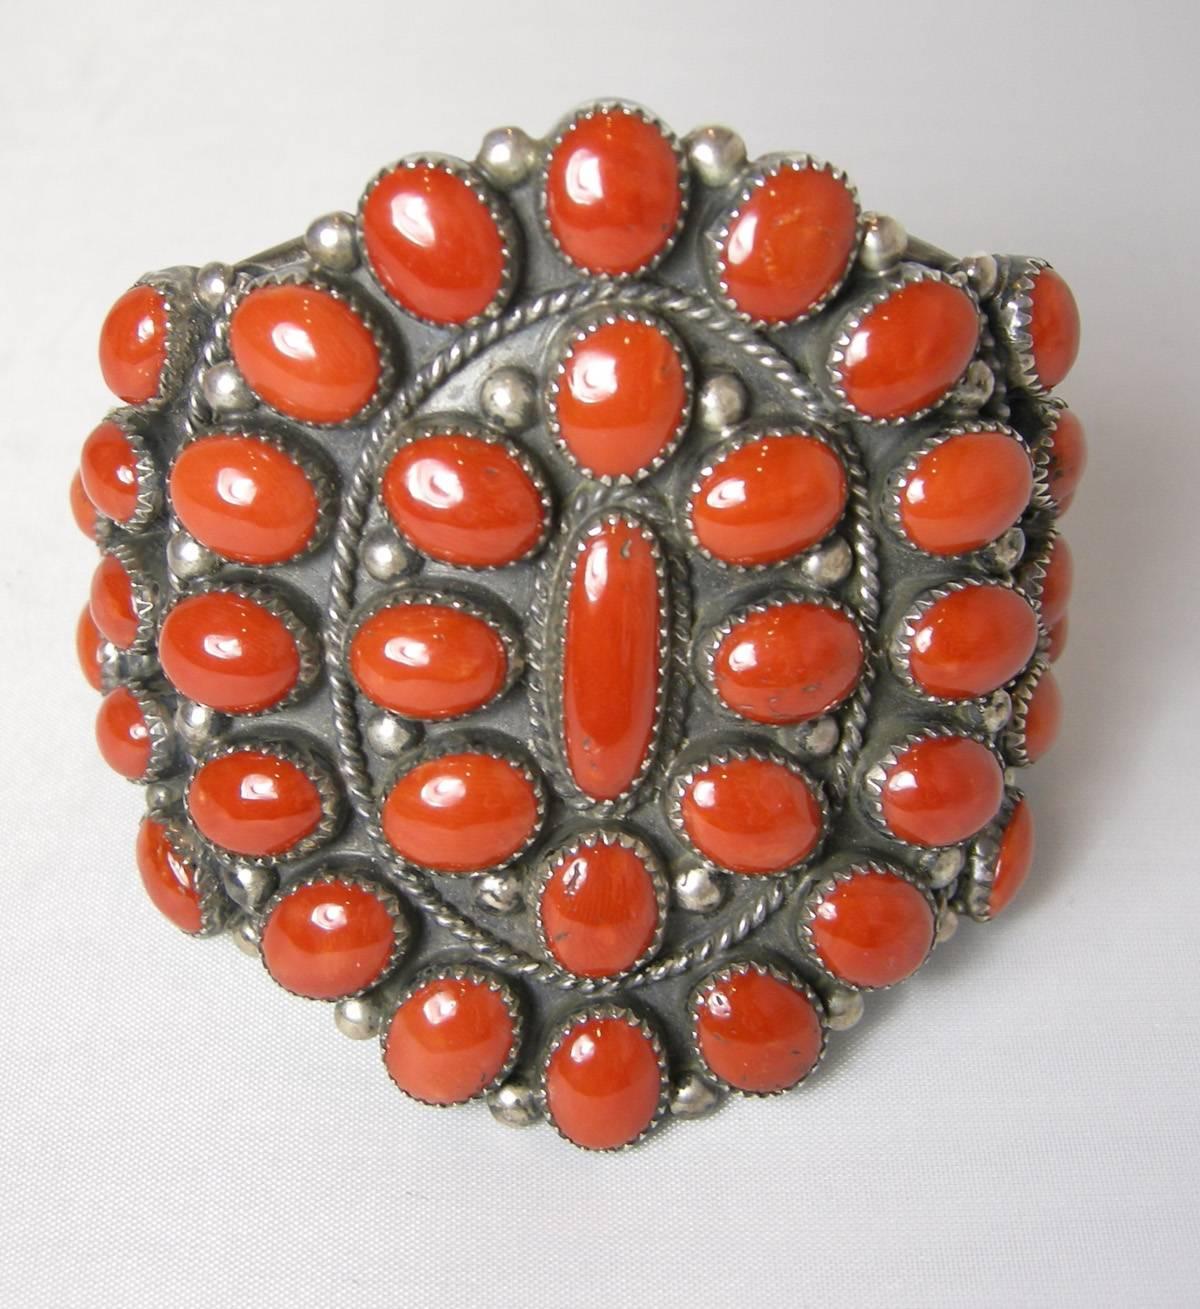 This large blood red coral cuff has graduated coral stones at the end and the larger oval shaped coral stones leading to the center where there is an oblong blood red coral stone.  All the stones are bezel set in sterling silver.  The height is